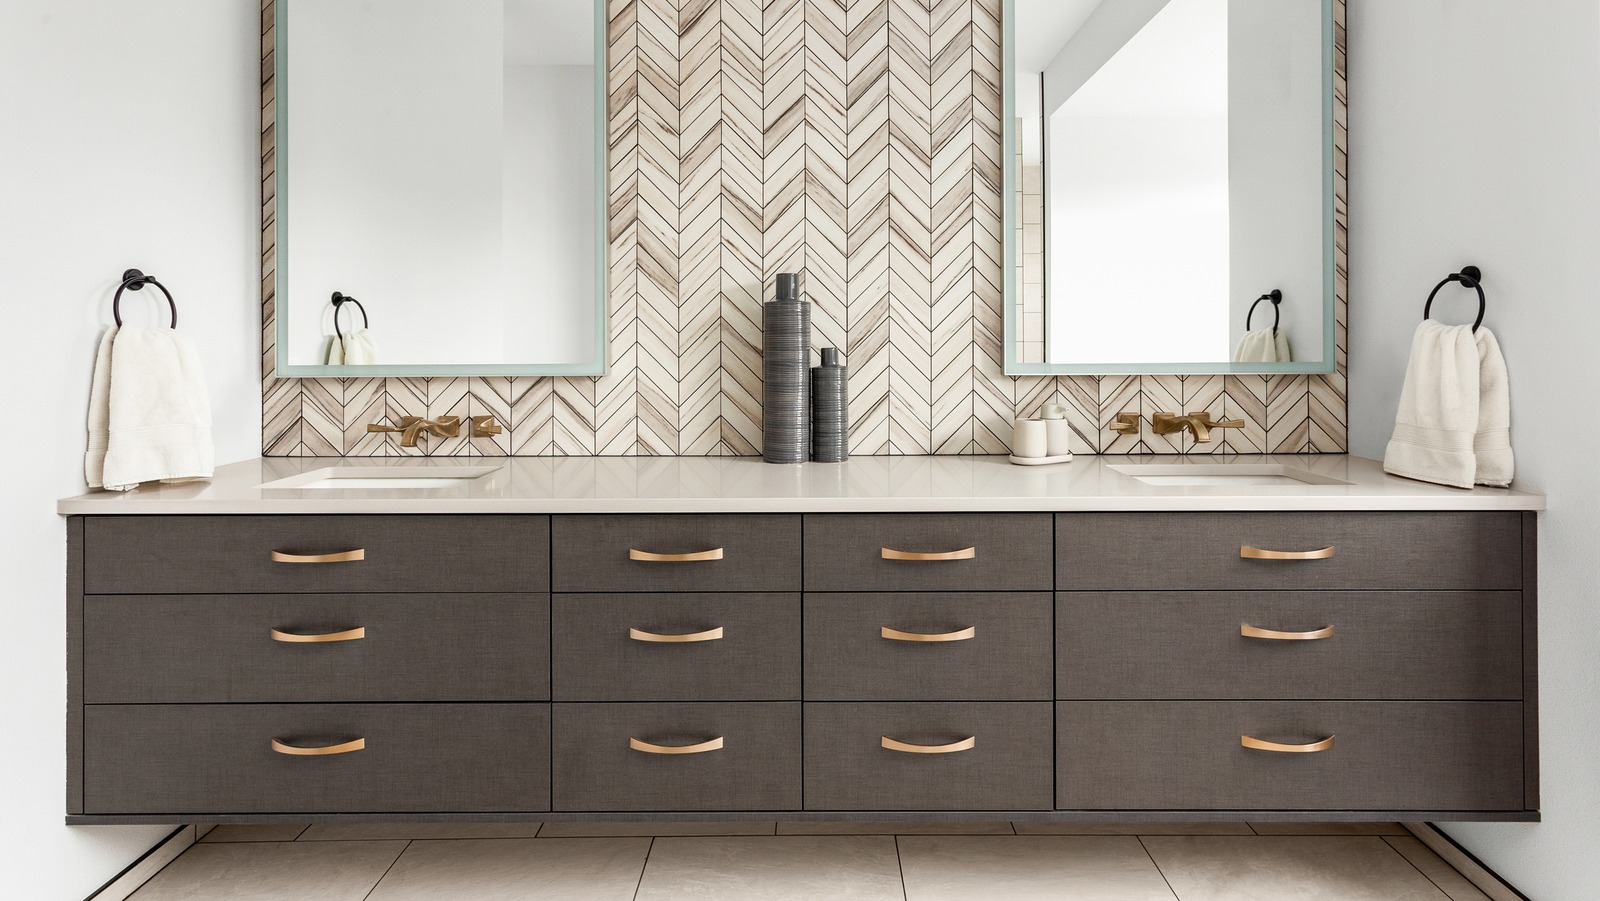 https://www.housedigest.com/img/gallery/upgrade-your-bathroom-by-installing-a-floating-vanity/l-intro-1678964517.jpg